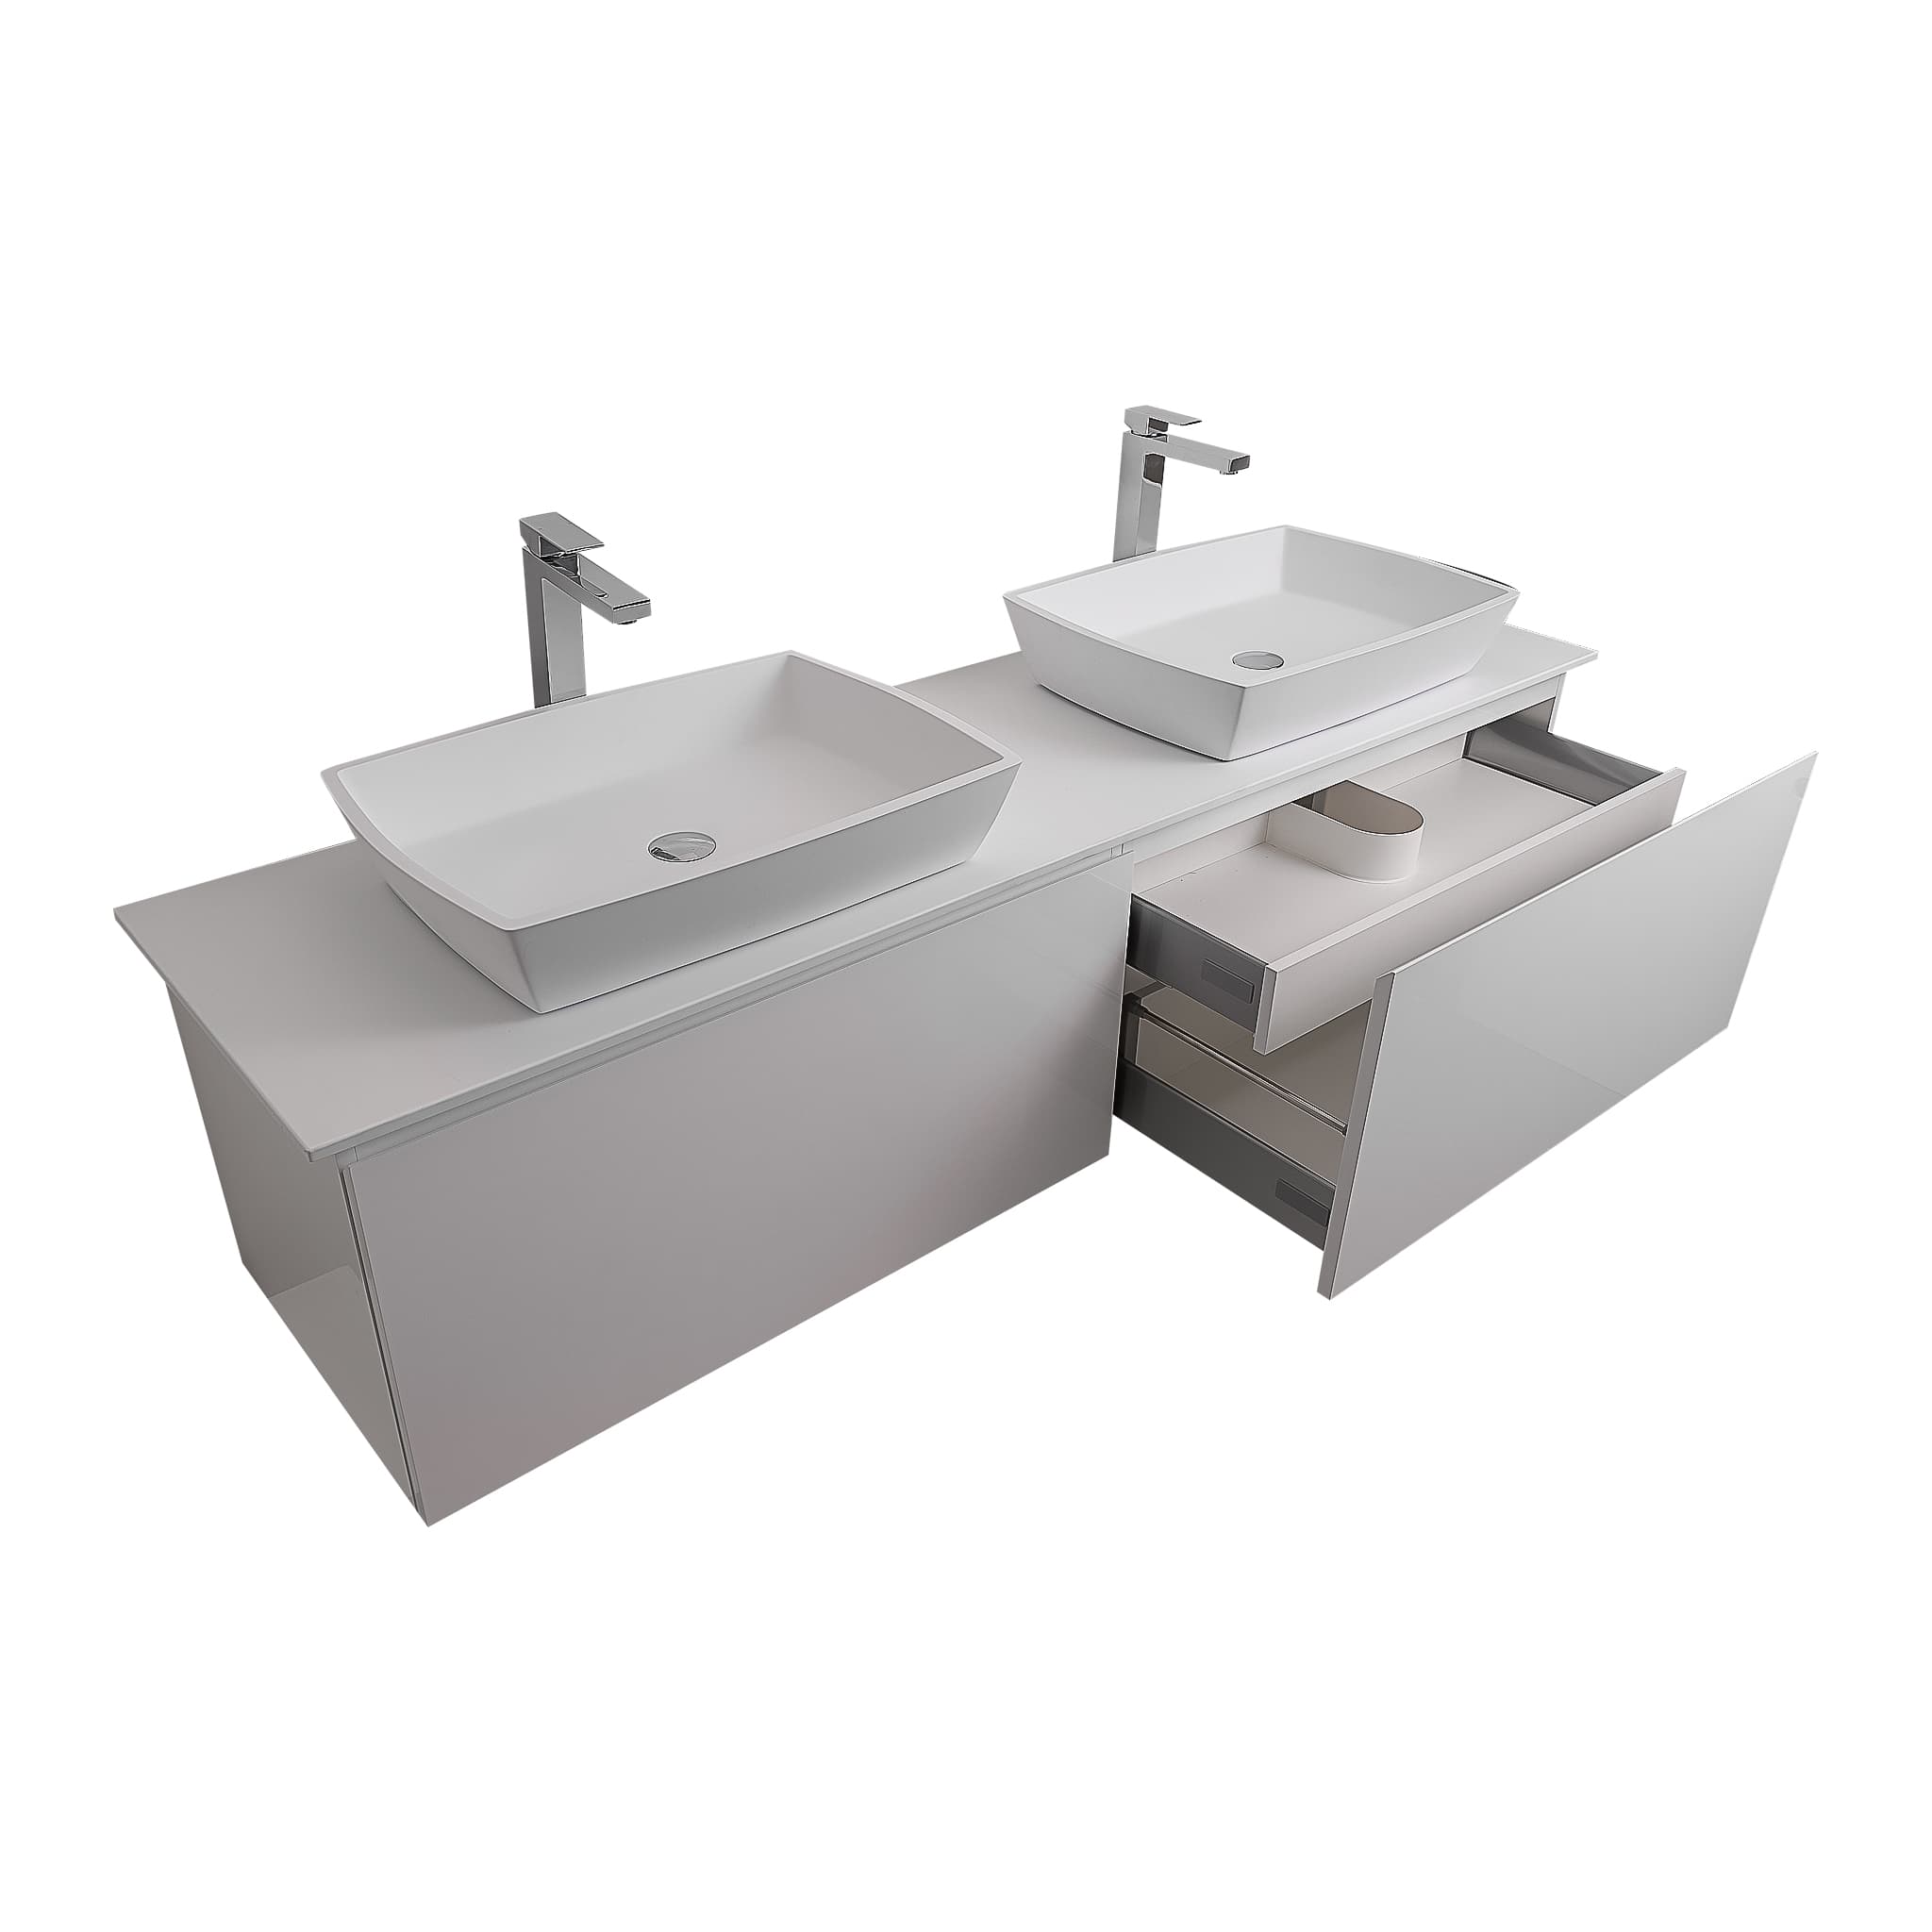 Venice 63 White High Gloss Cabinet, Solid Surface Flat White Counter And Two Square Solid Surface White Basin 1316, Wall Mounted Modern Vanity Set